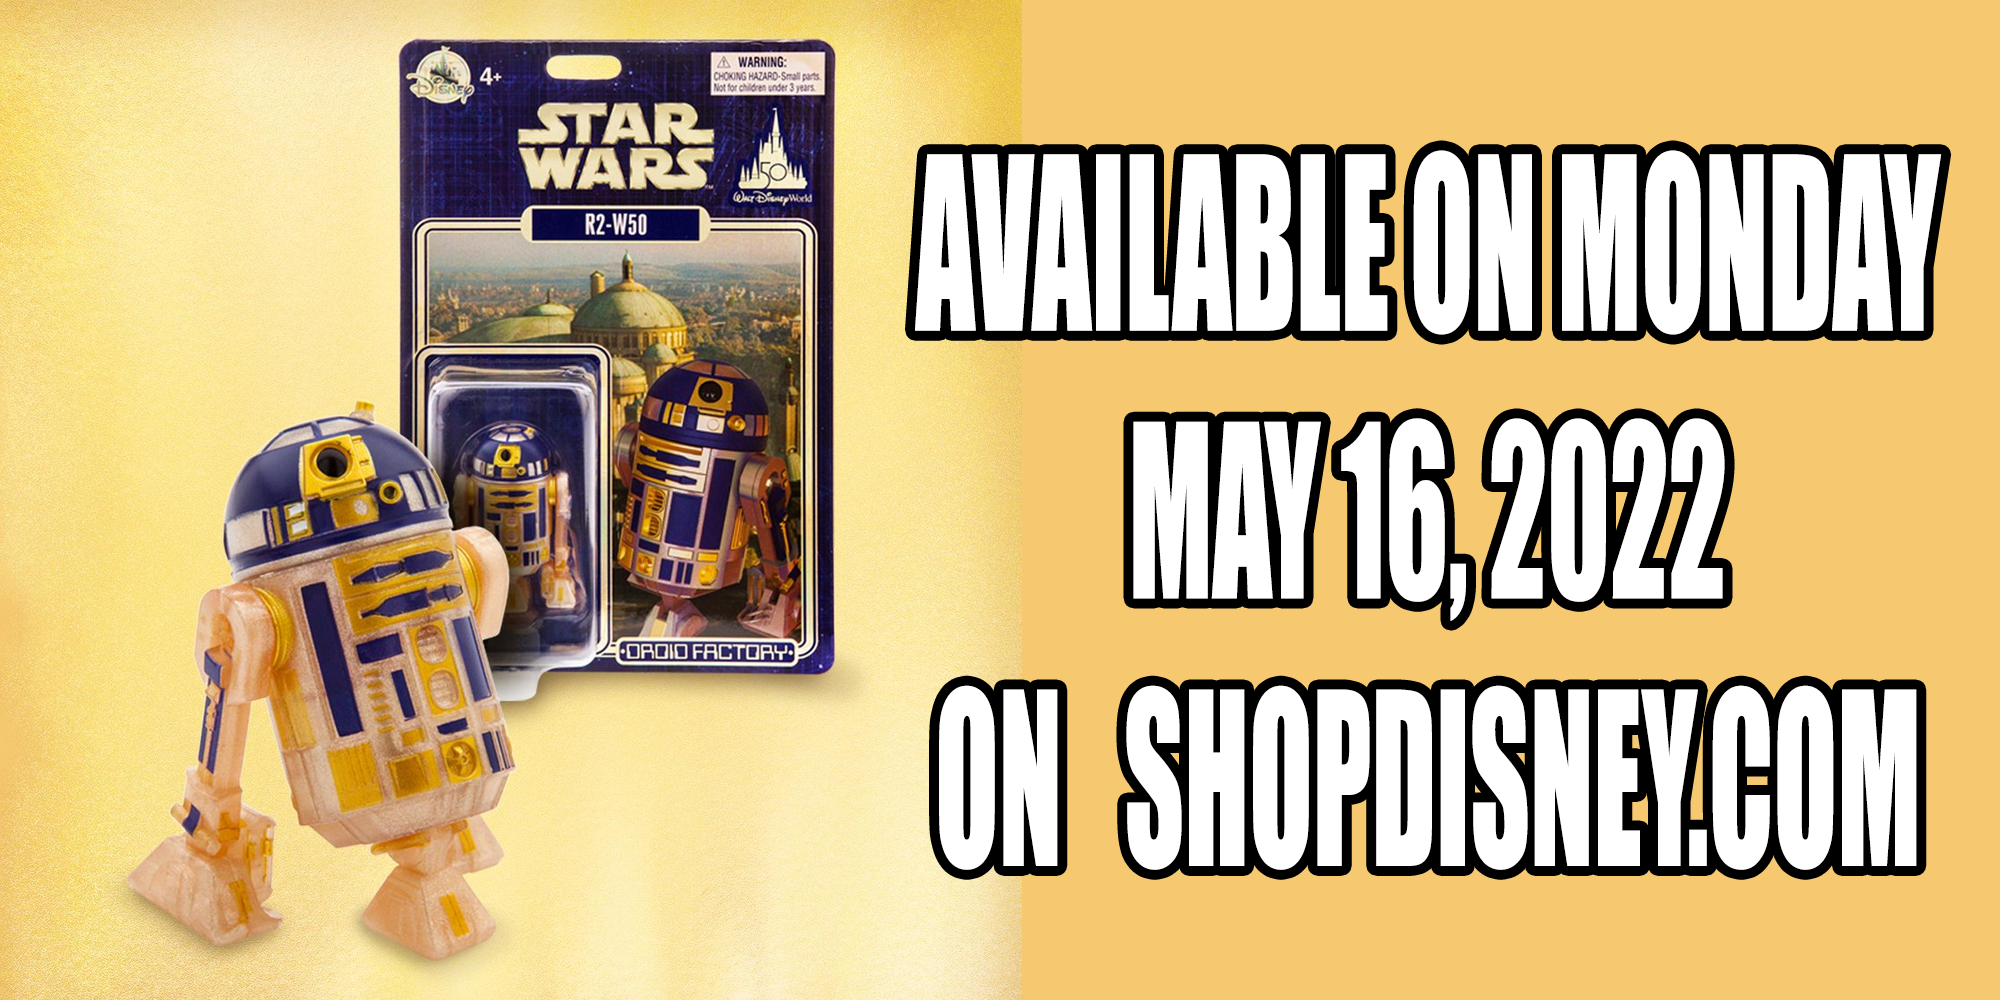 R2-W50 Coming To ShopDisney On May 16, 2022